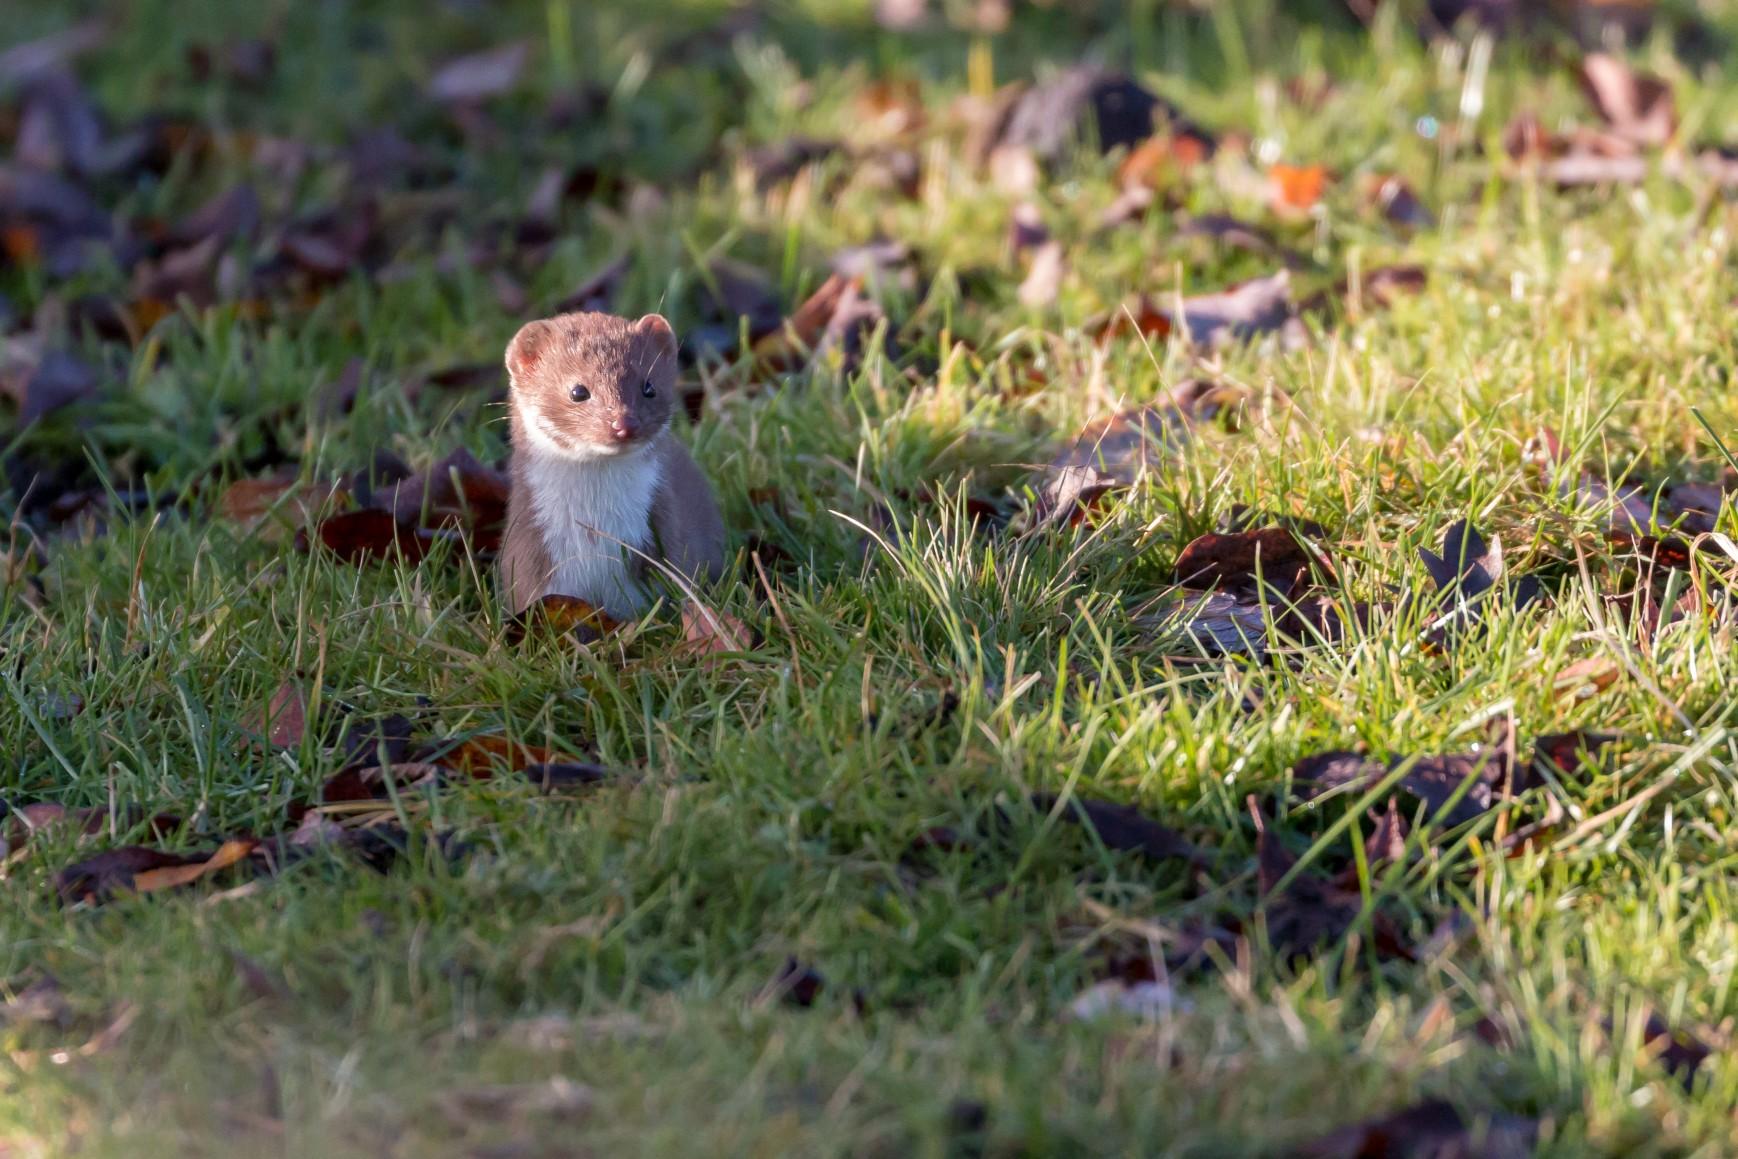 A weasel standing in the grass.